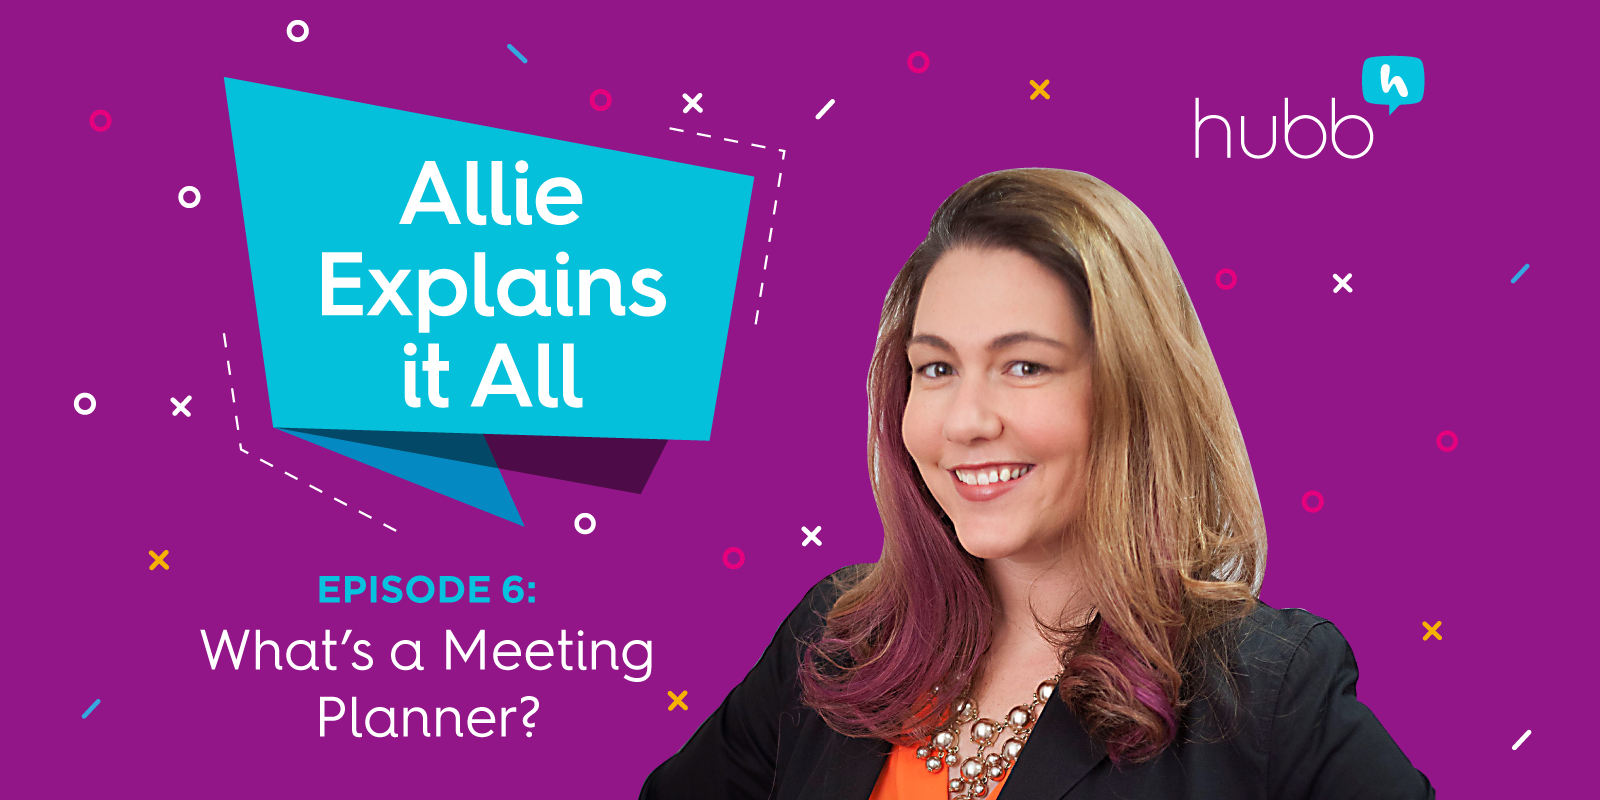 Allie Explains It All, Episode 6: What is a meeting planner?